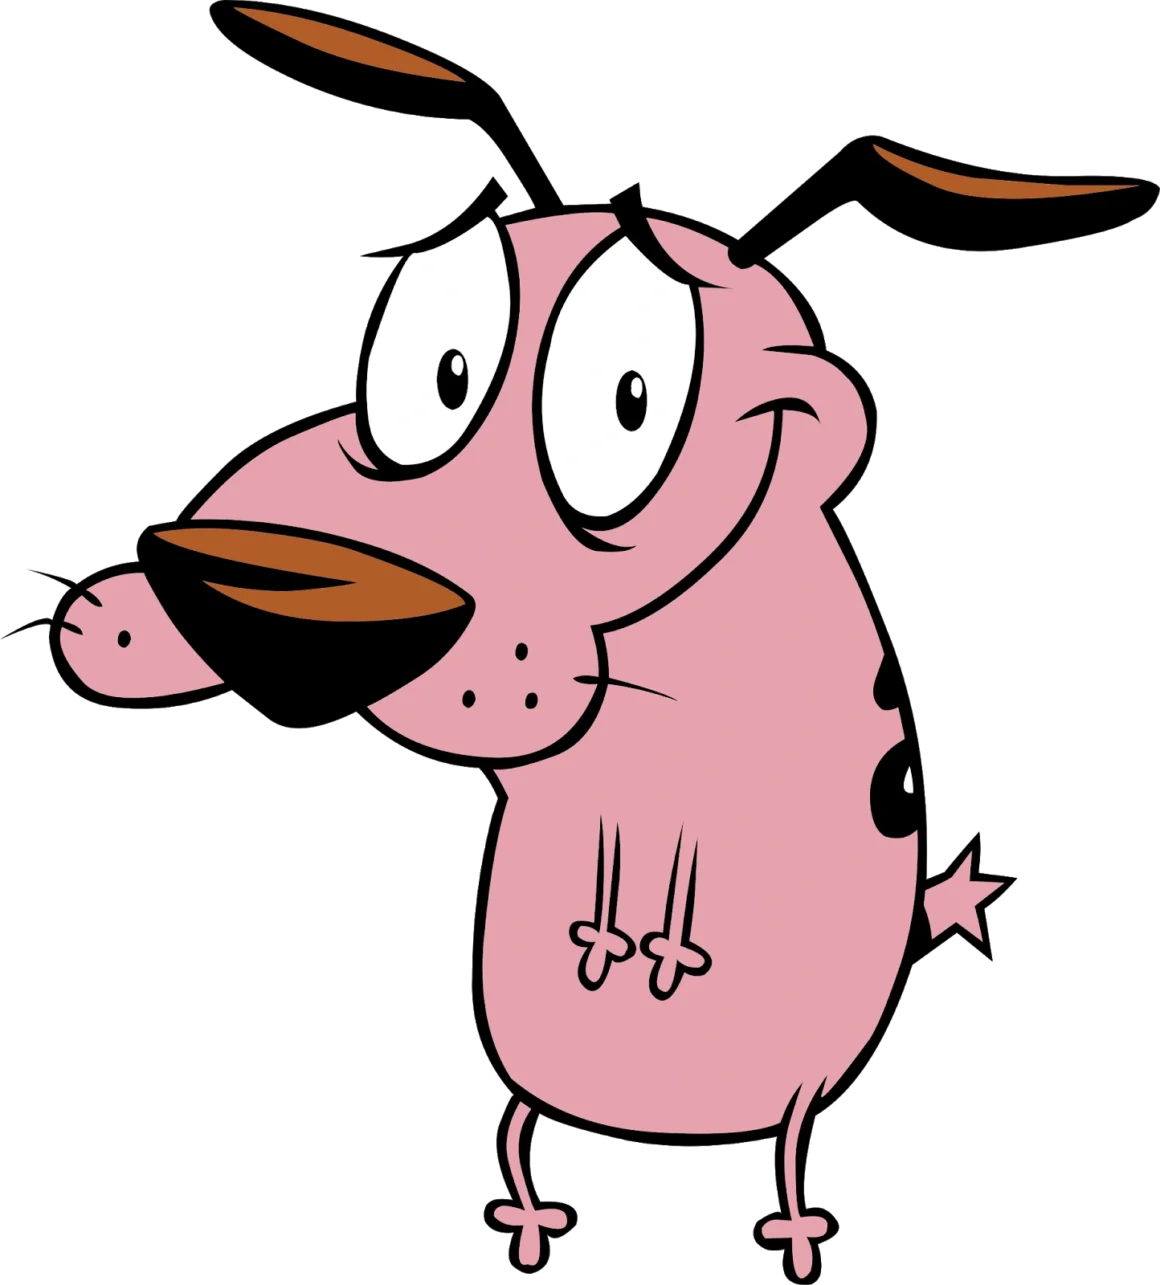 Courage the cowardly dog cartoon dogs